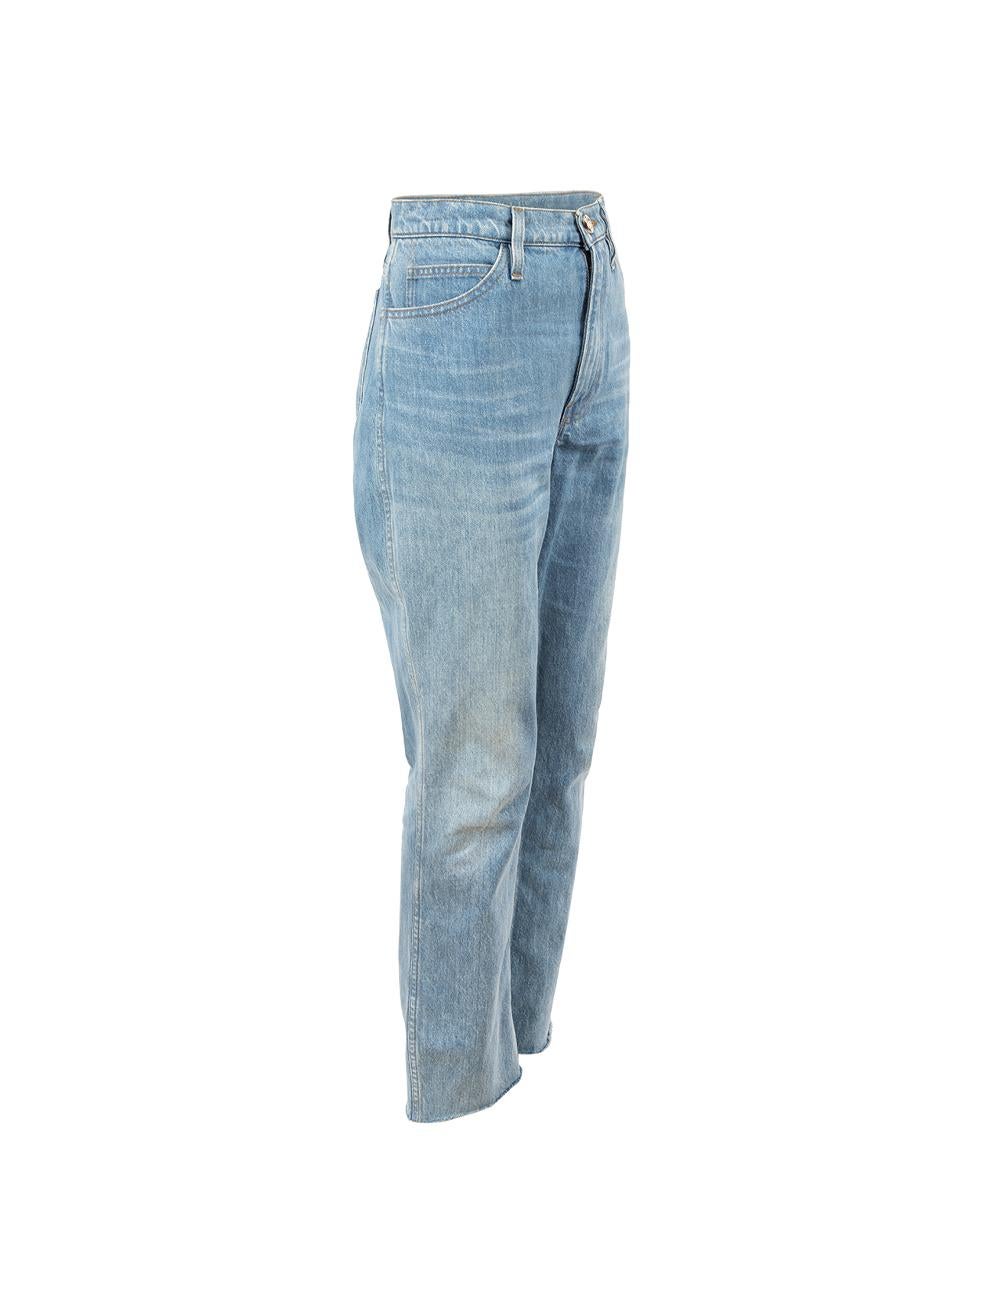 CONDITION is Very good. Minimal wear to jeans is evident. Minimal wear to right leg with faint marks on this used FRAME x Ritz designer resale item. 



Details


Blue

Denim

Straight leg jeans

Cropped length

High rise

Front zip closure with